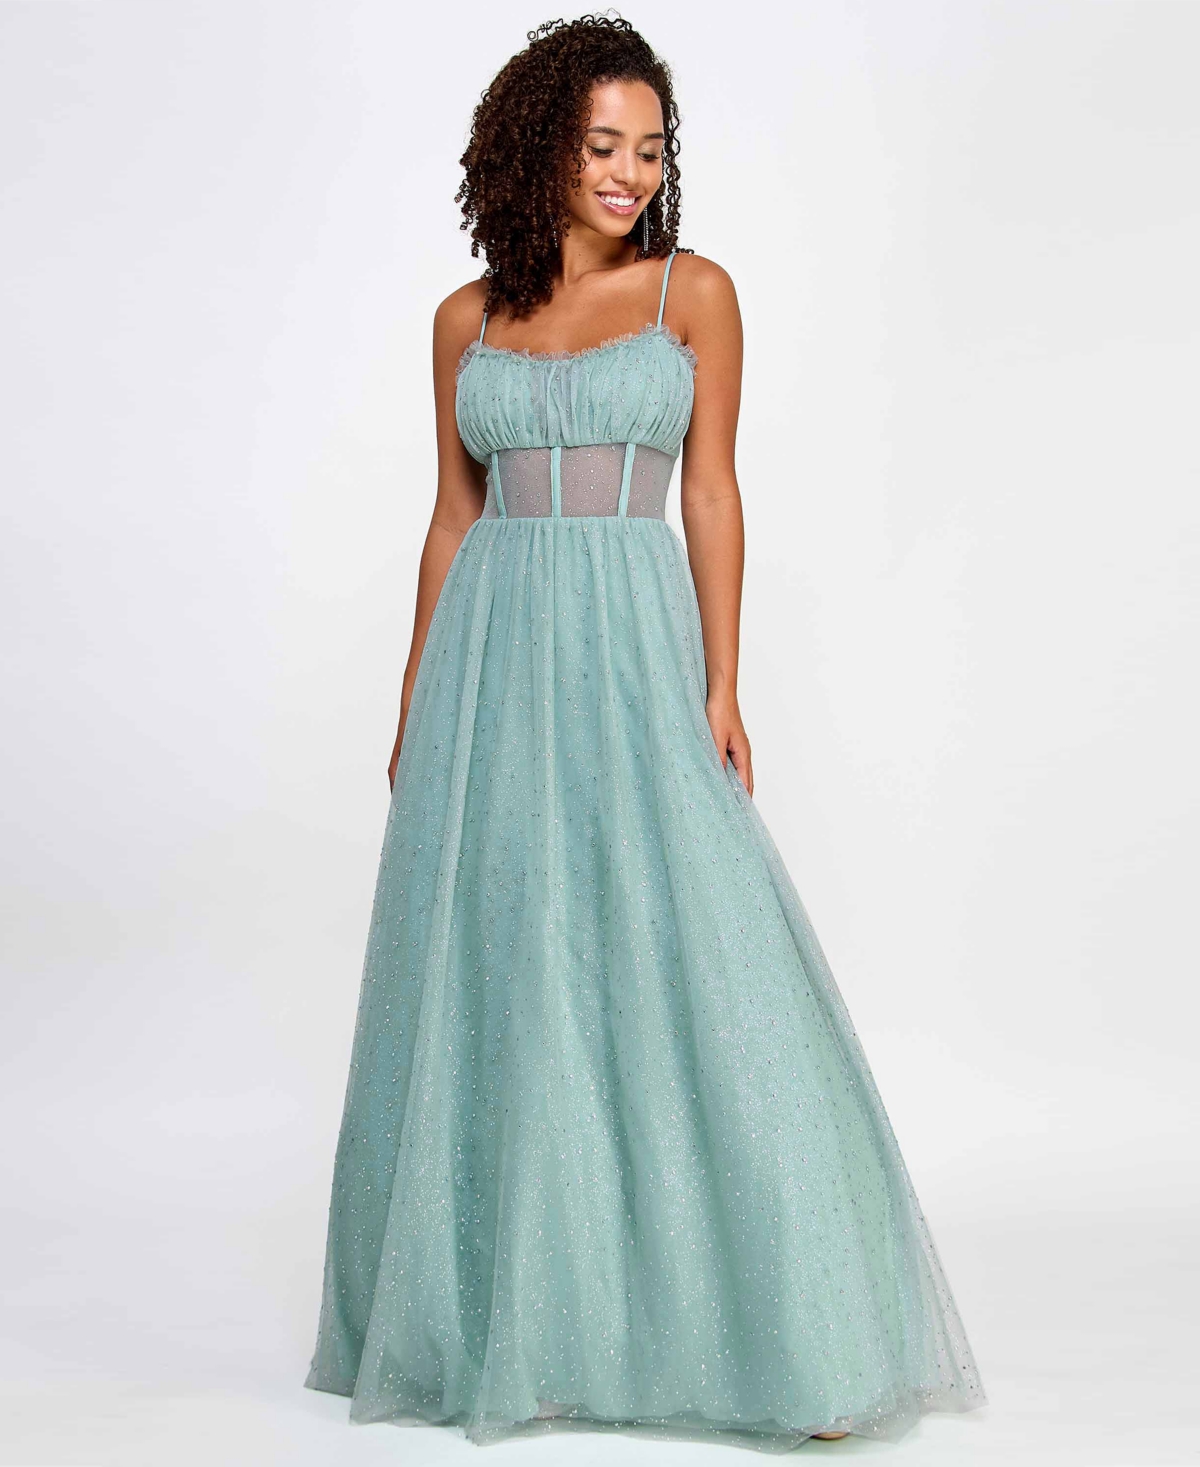 Juniors' Rhinestone-Embellished Mesh-Waist Gown, Created for Macy's - Seagreen